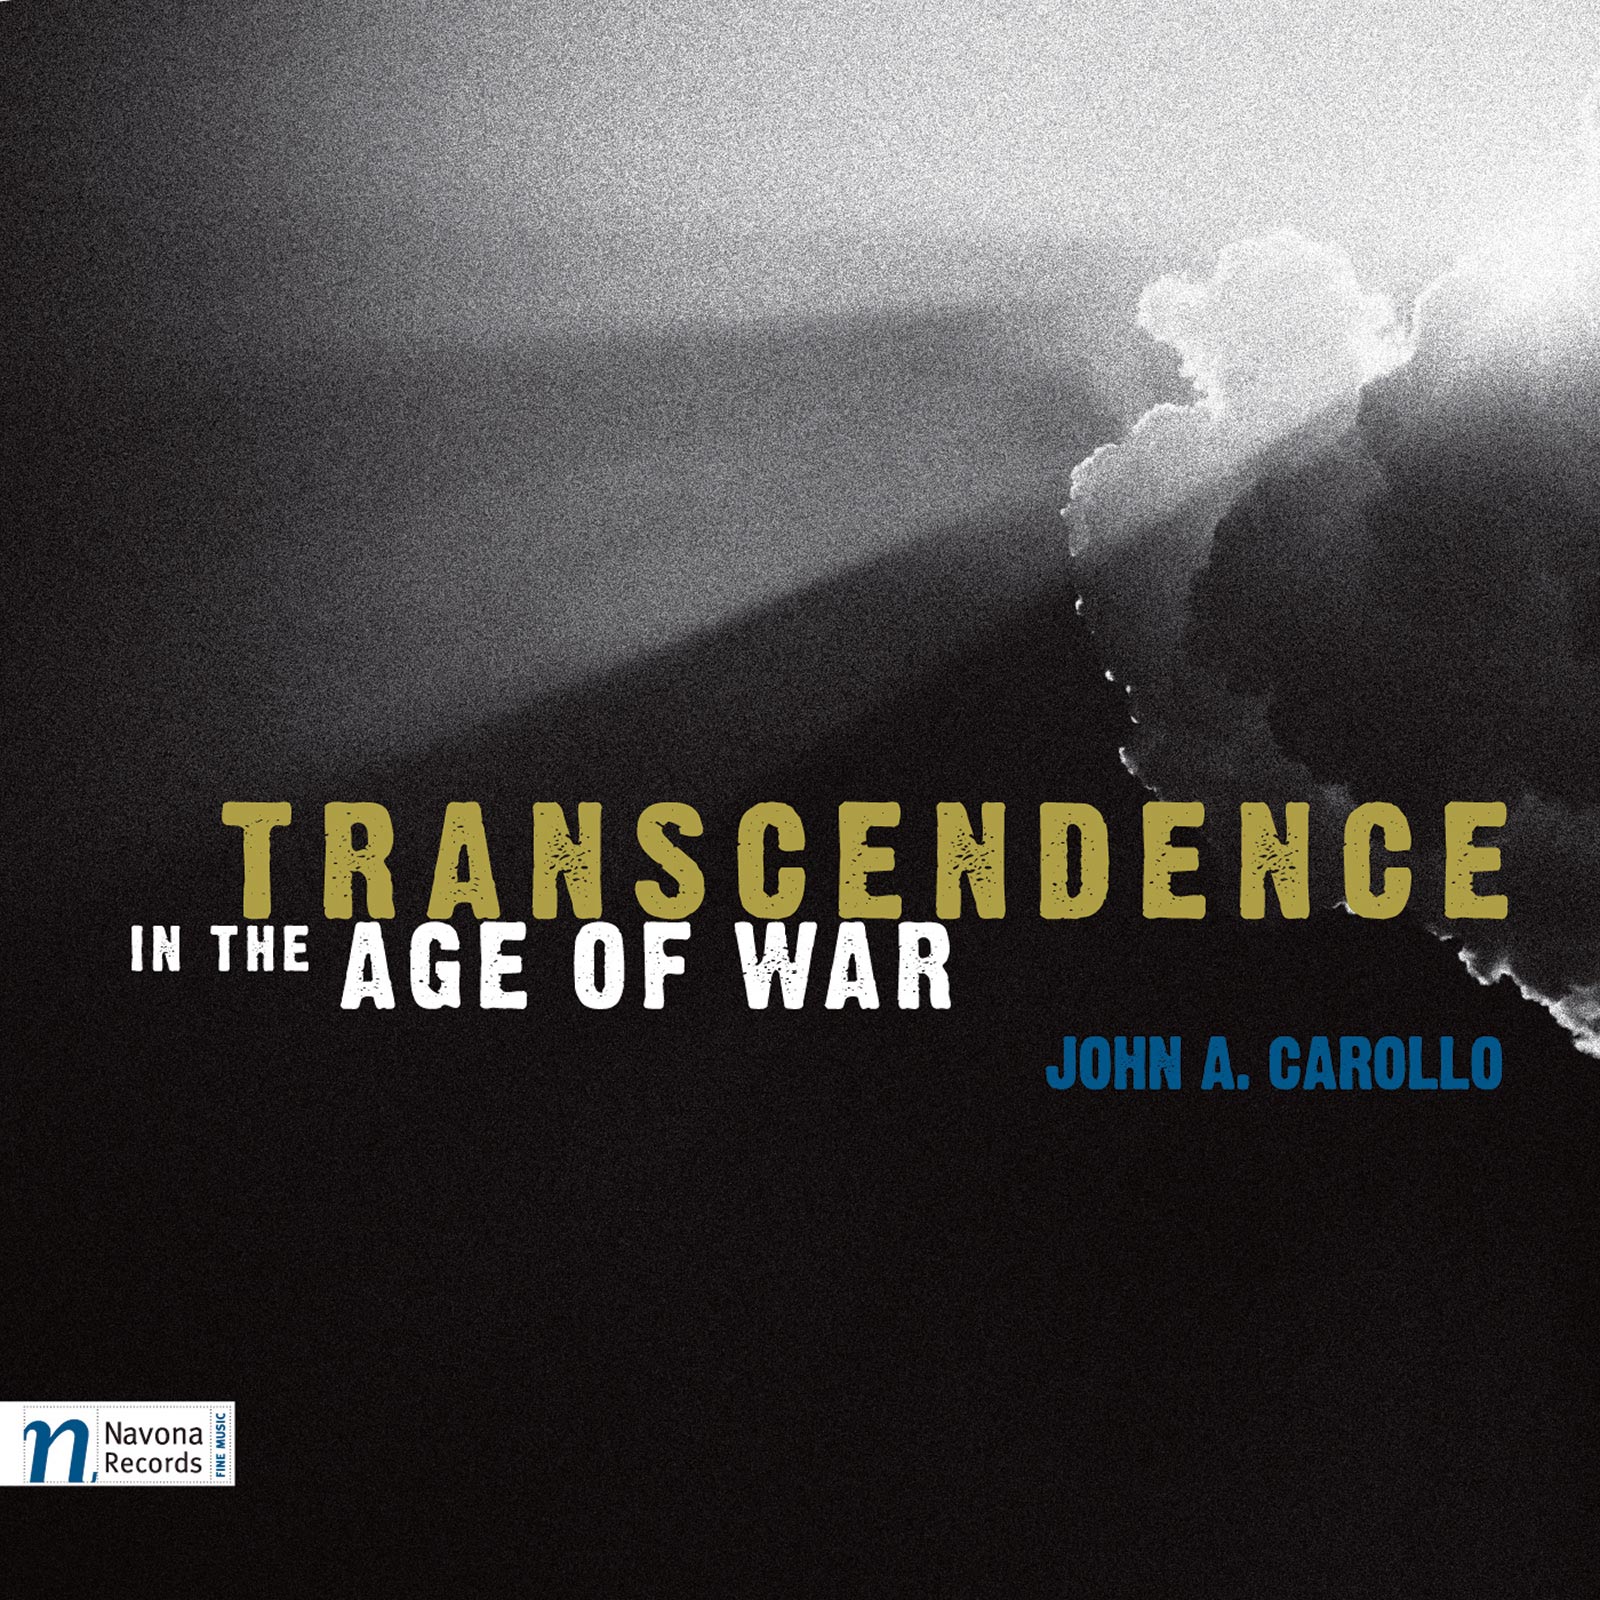 Transcendence in the Age of War